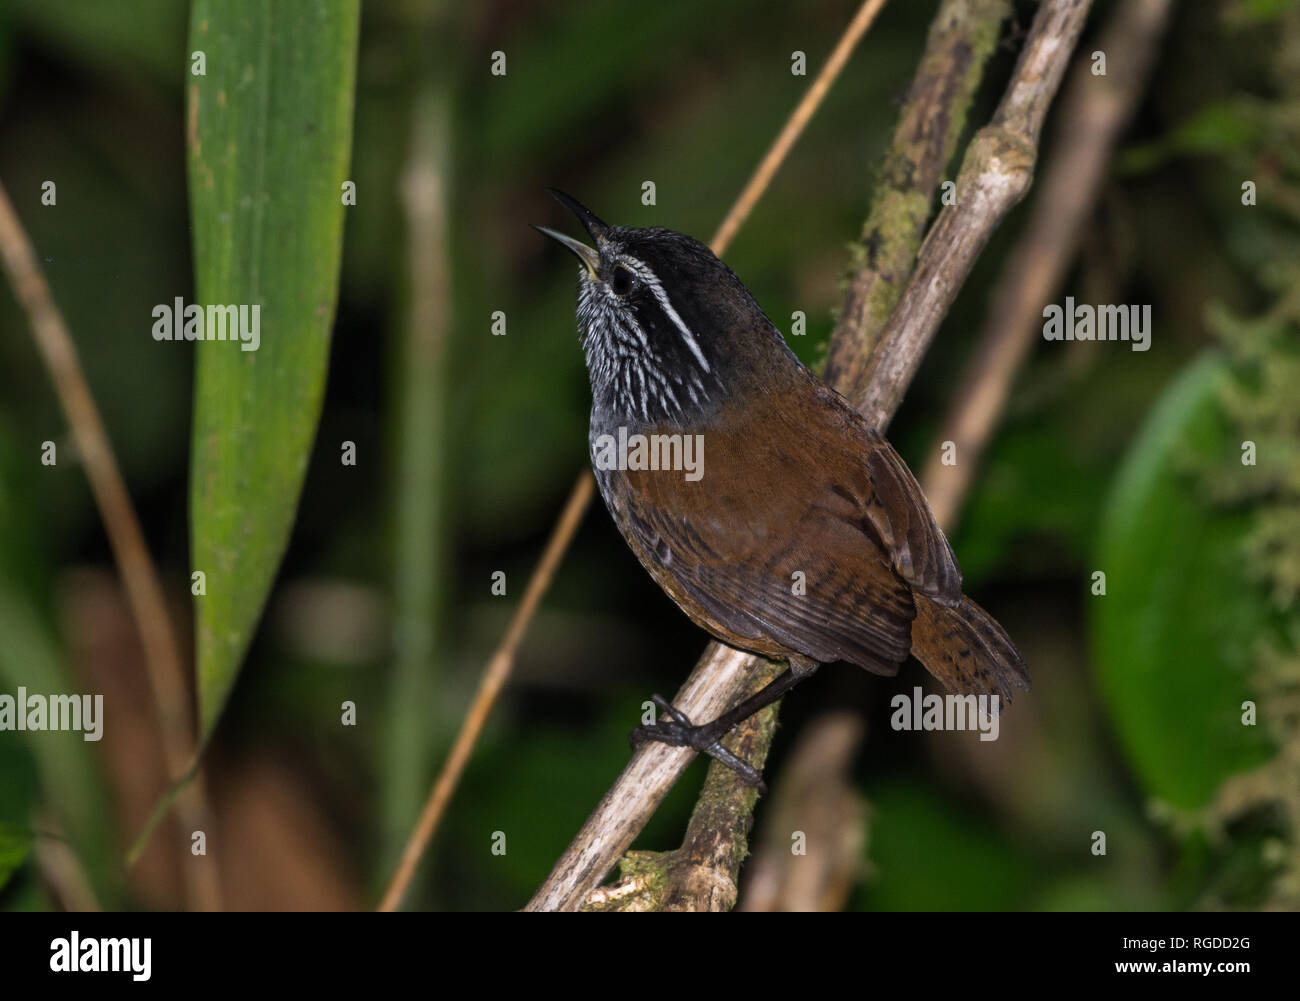 A Gray-breasted Wood-Wren (Henicorhina leucophrys) singing in the bushes. Costa Rica, Central America. Stock Photo